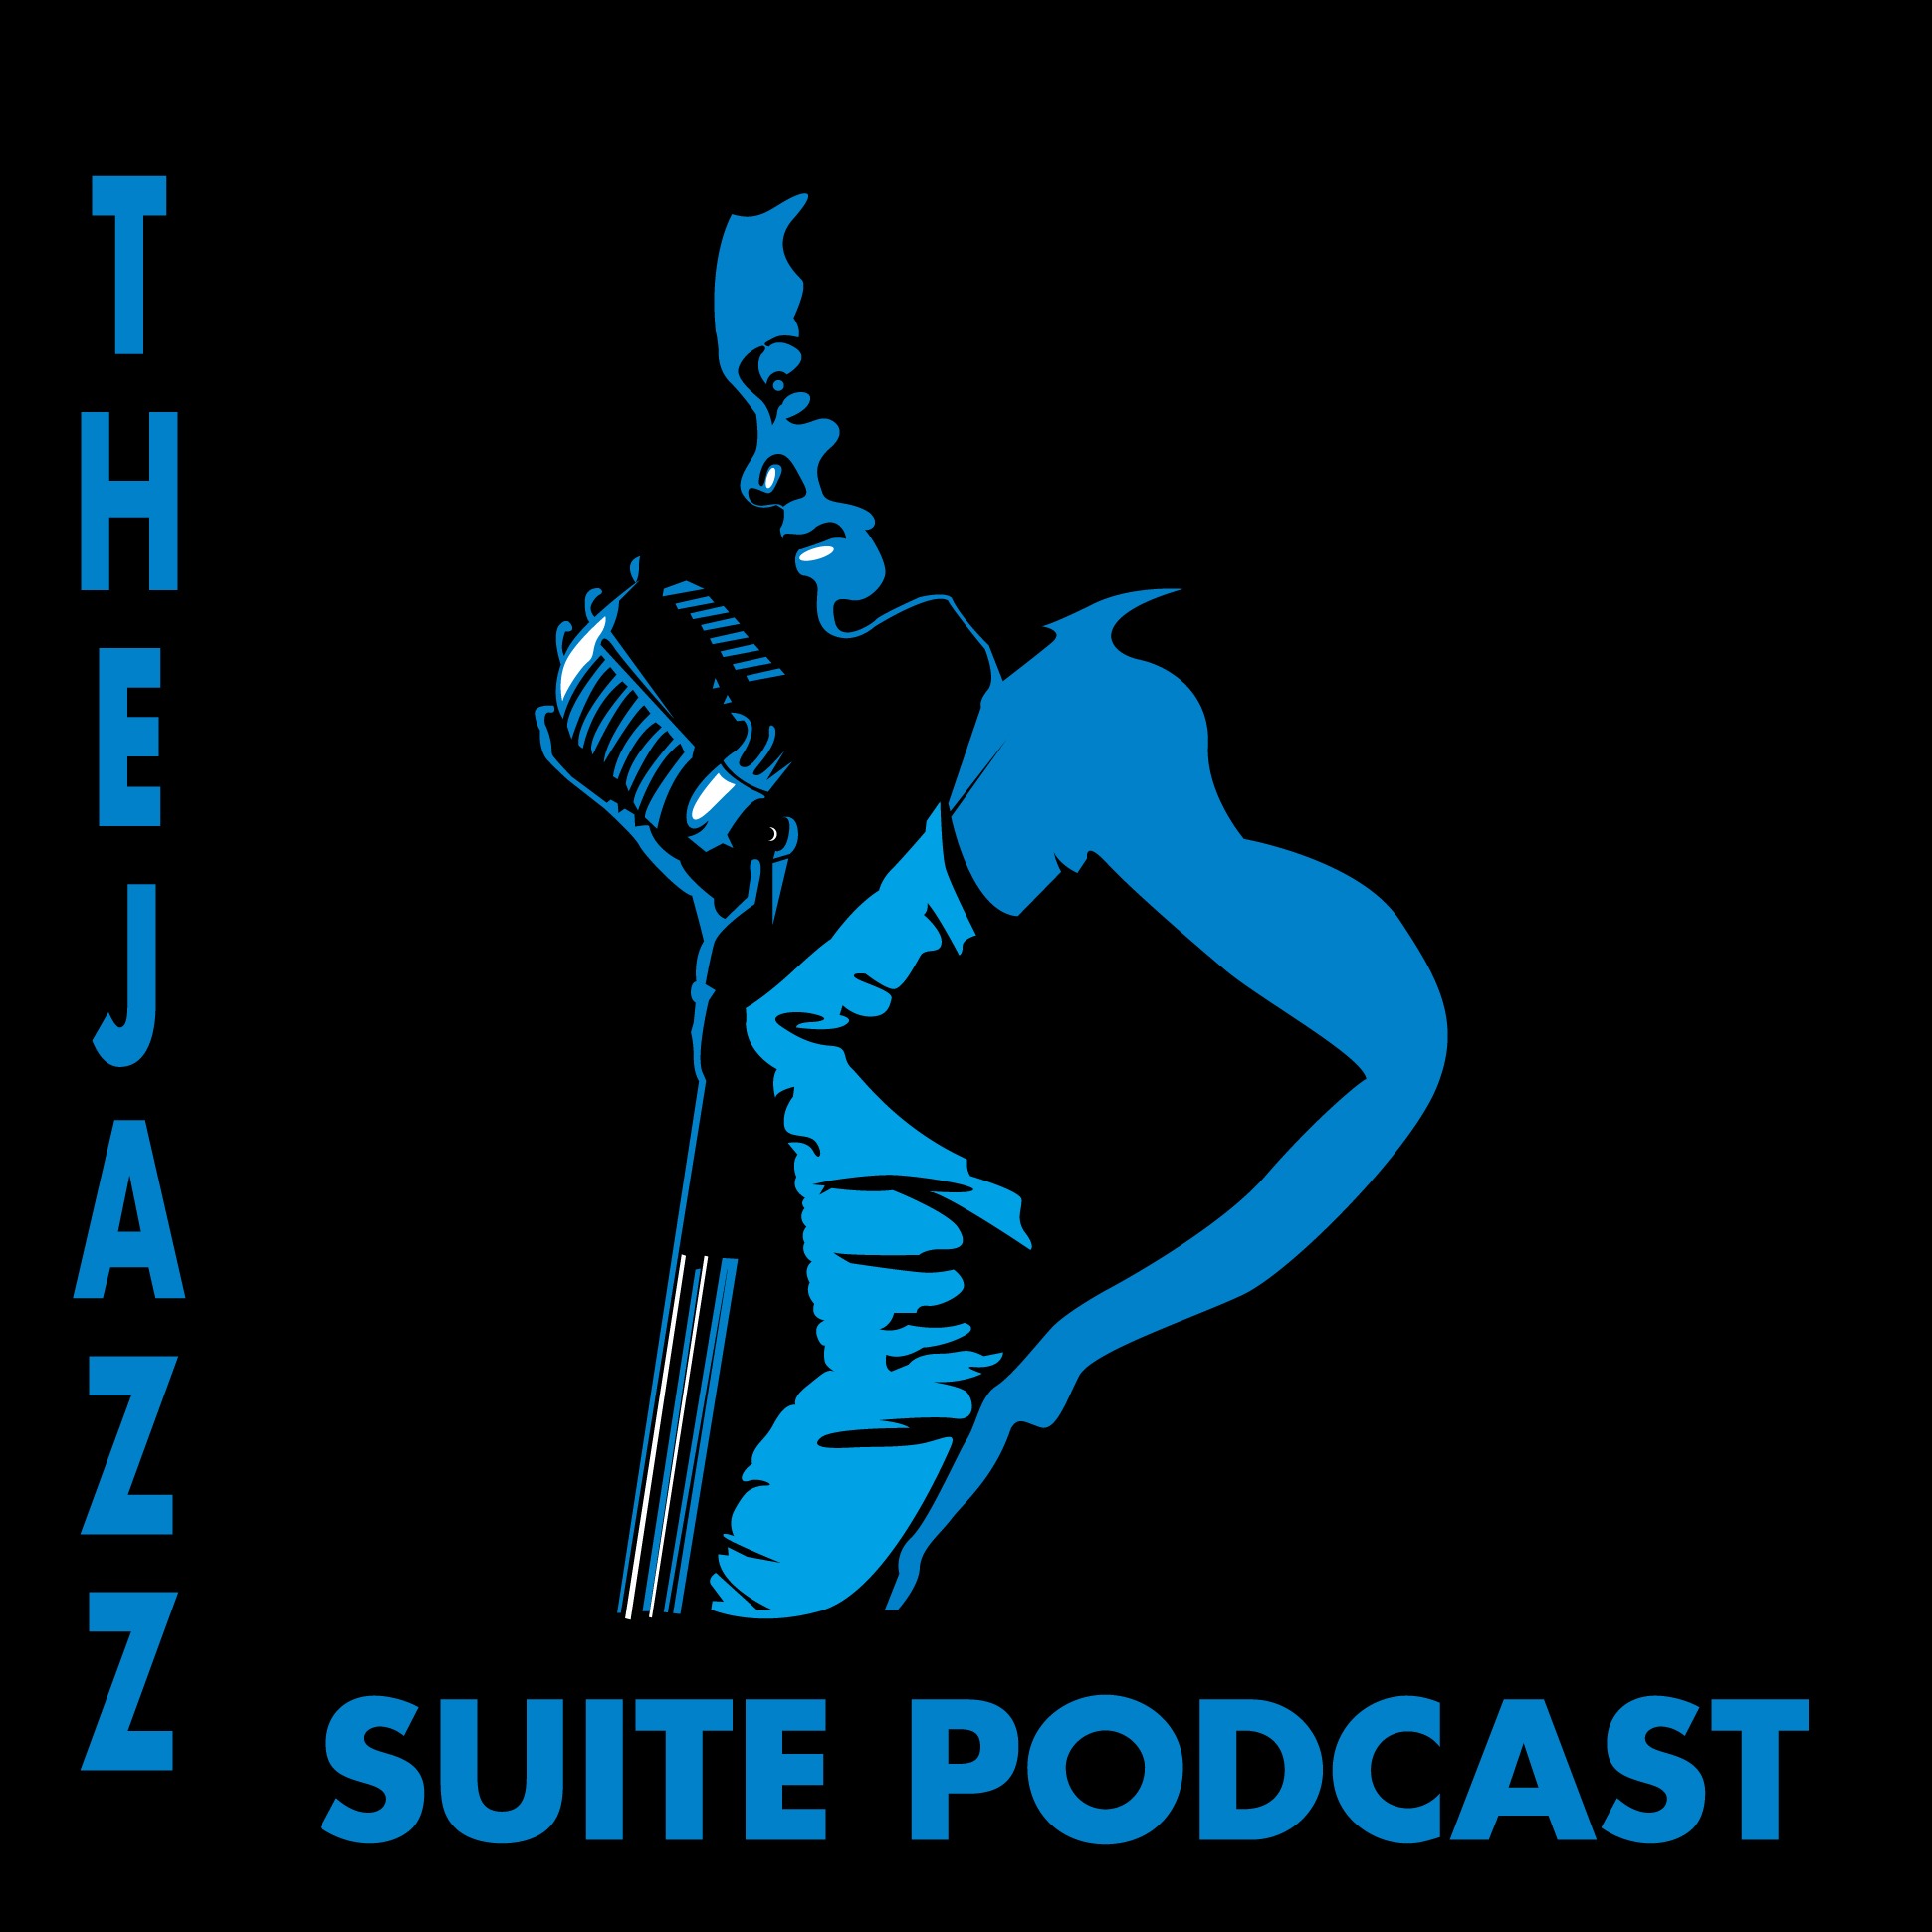 The Jazz Suite Podcast Show #452